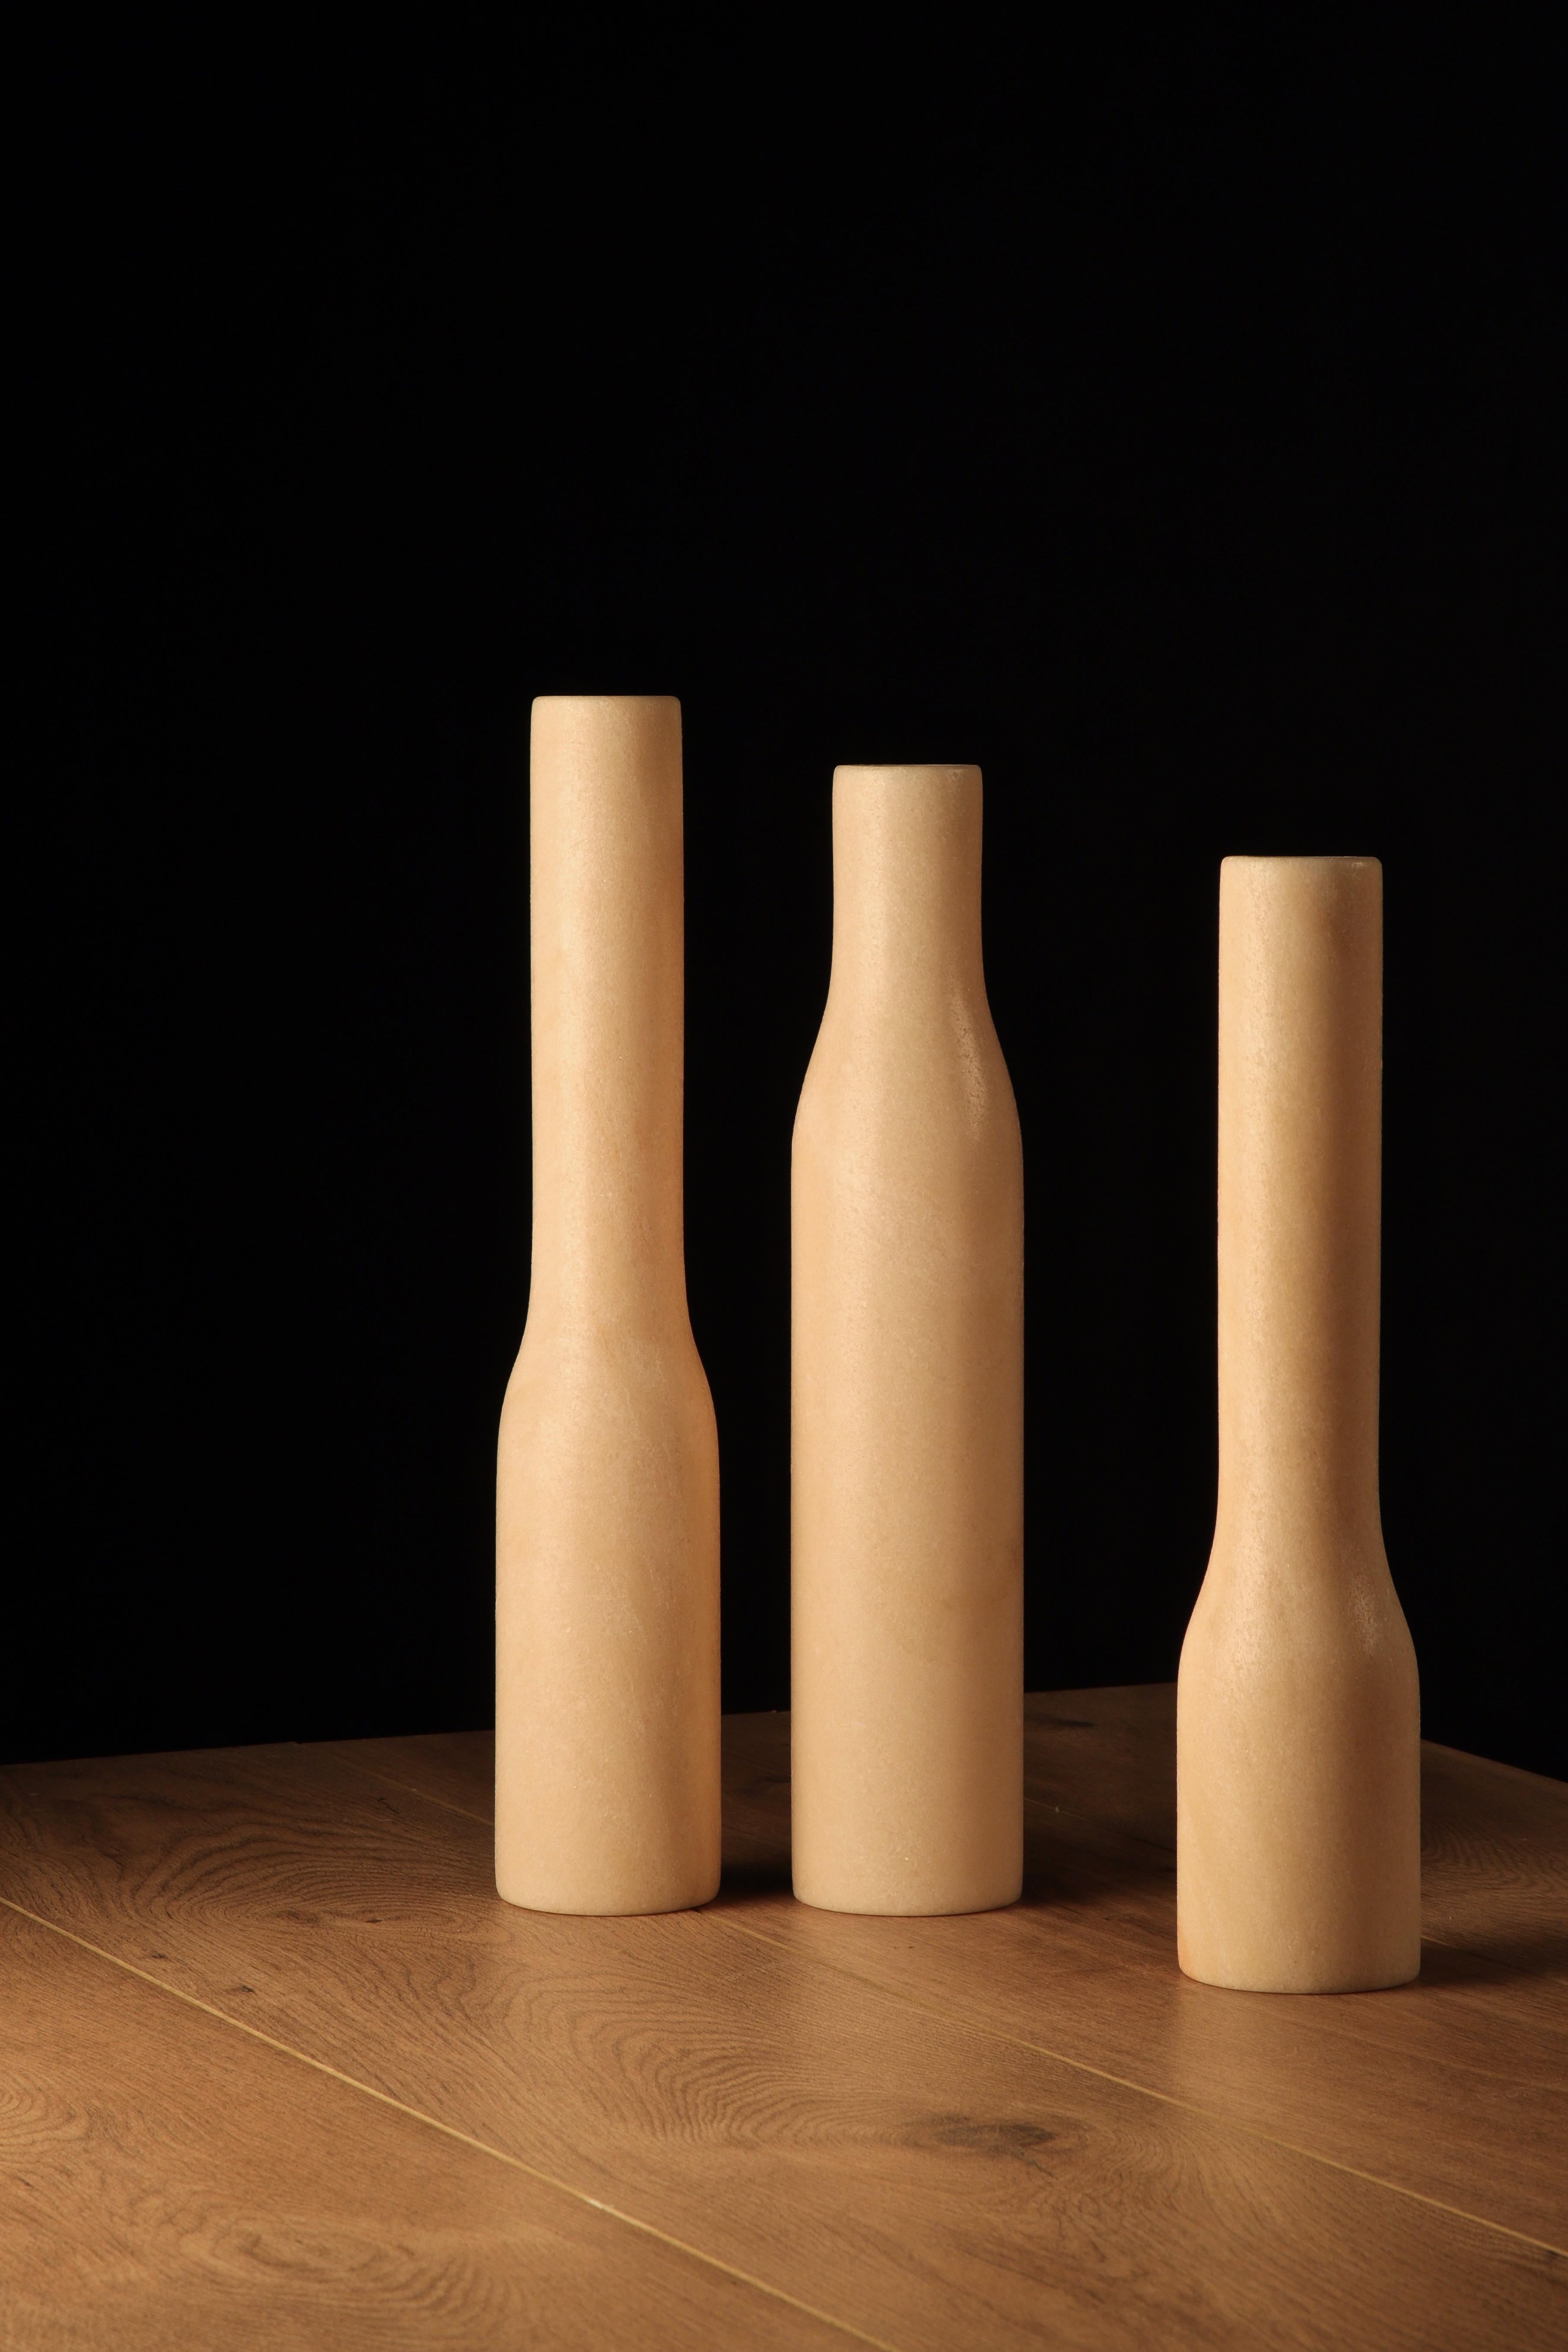 Our bottles pay homage to the greats-De Chirico, Savinio, Soffici, Carrà, Morandi all the way to Rampinelli and Dalbecco-and push the viewer to go beyond tangibility, beyond time and space.
They were made of pink Portuguese marble, and through acid